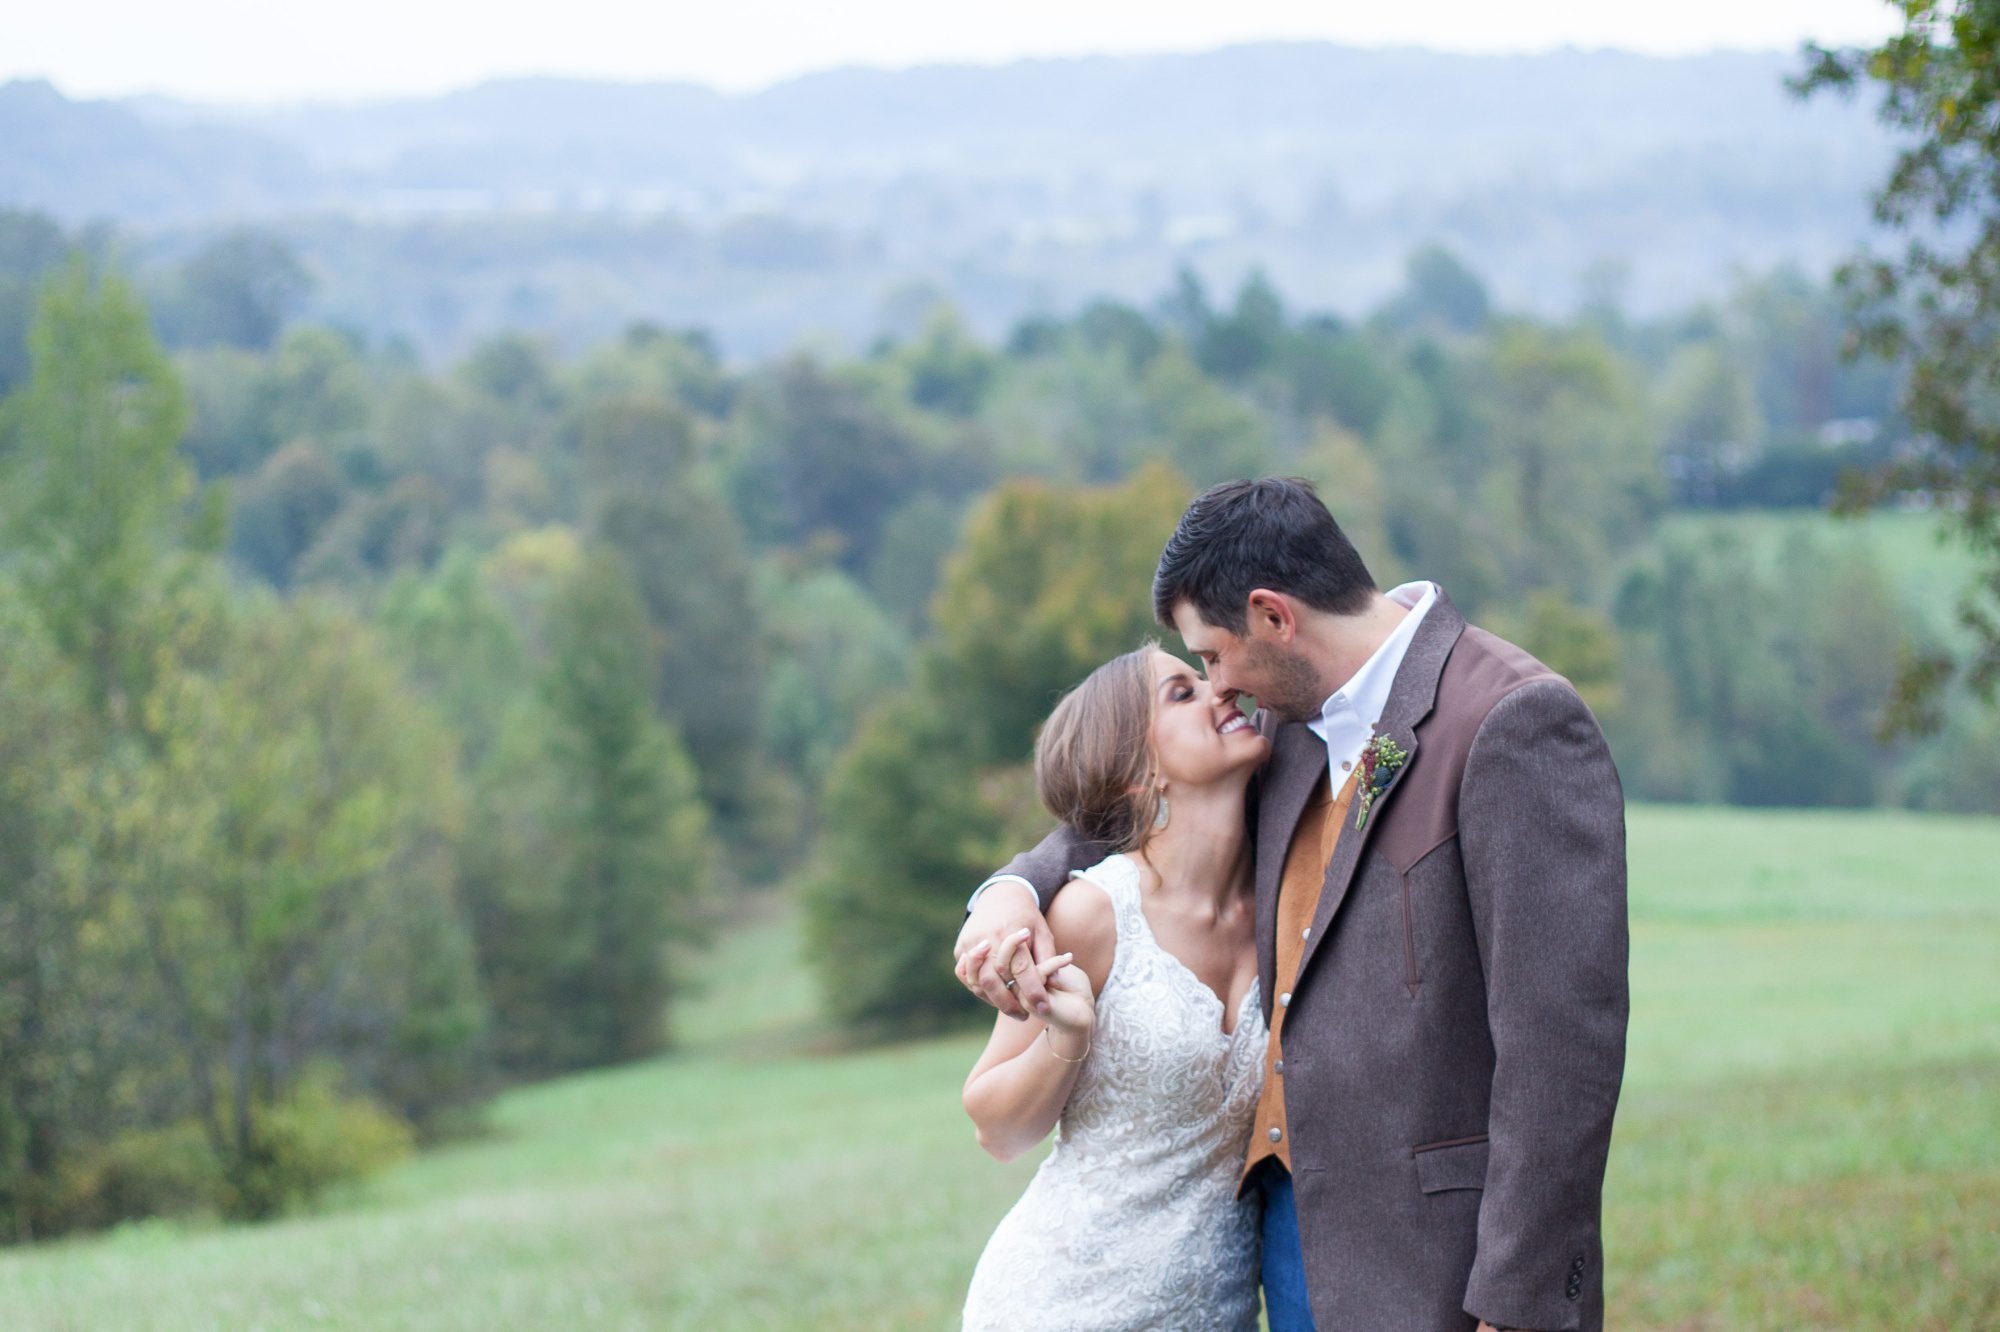 Bride and groom do portraits with hills in background after wedding ceremony photography at Front Porch Farms, Wedding photography by Krista Lee